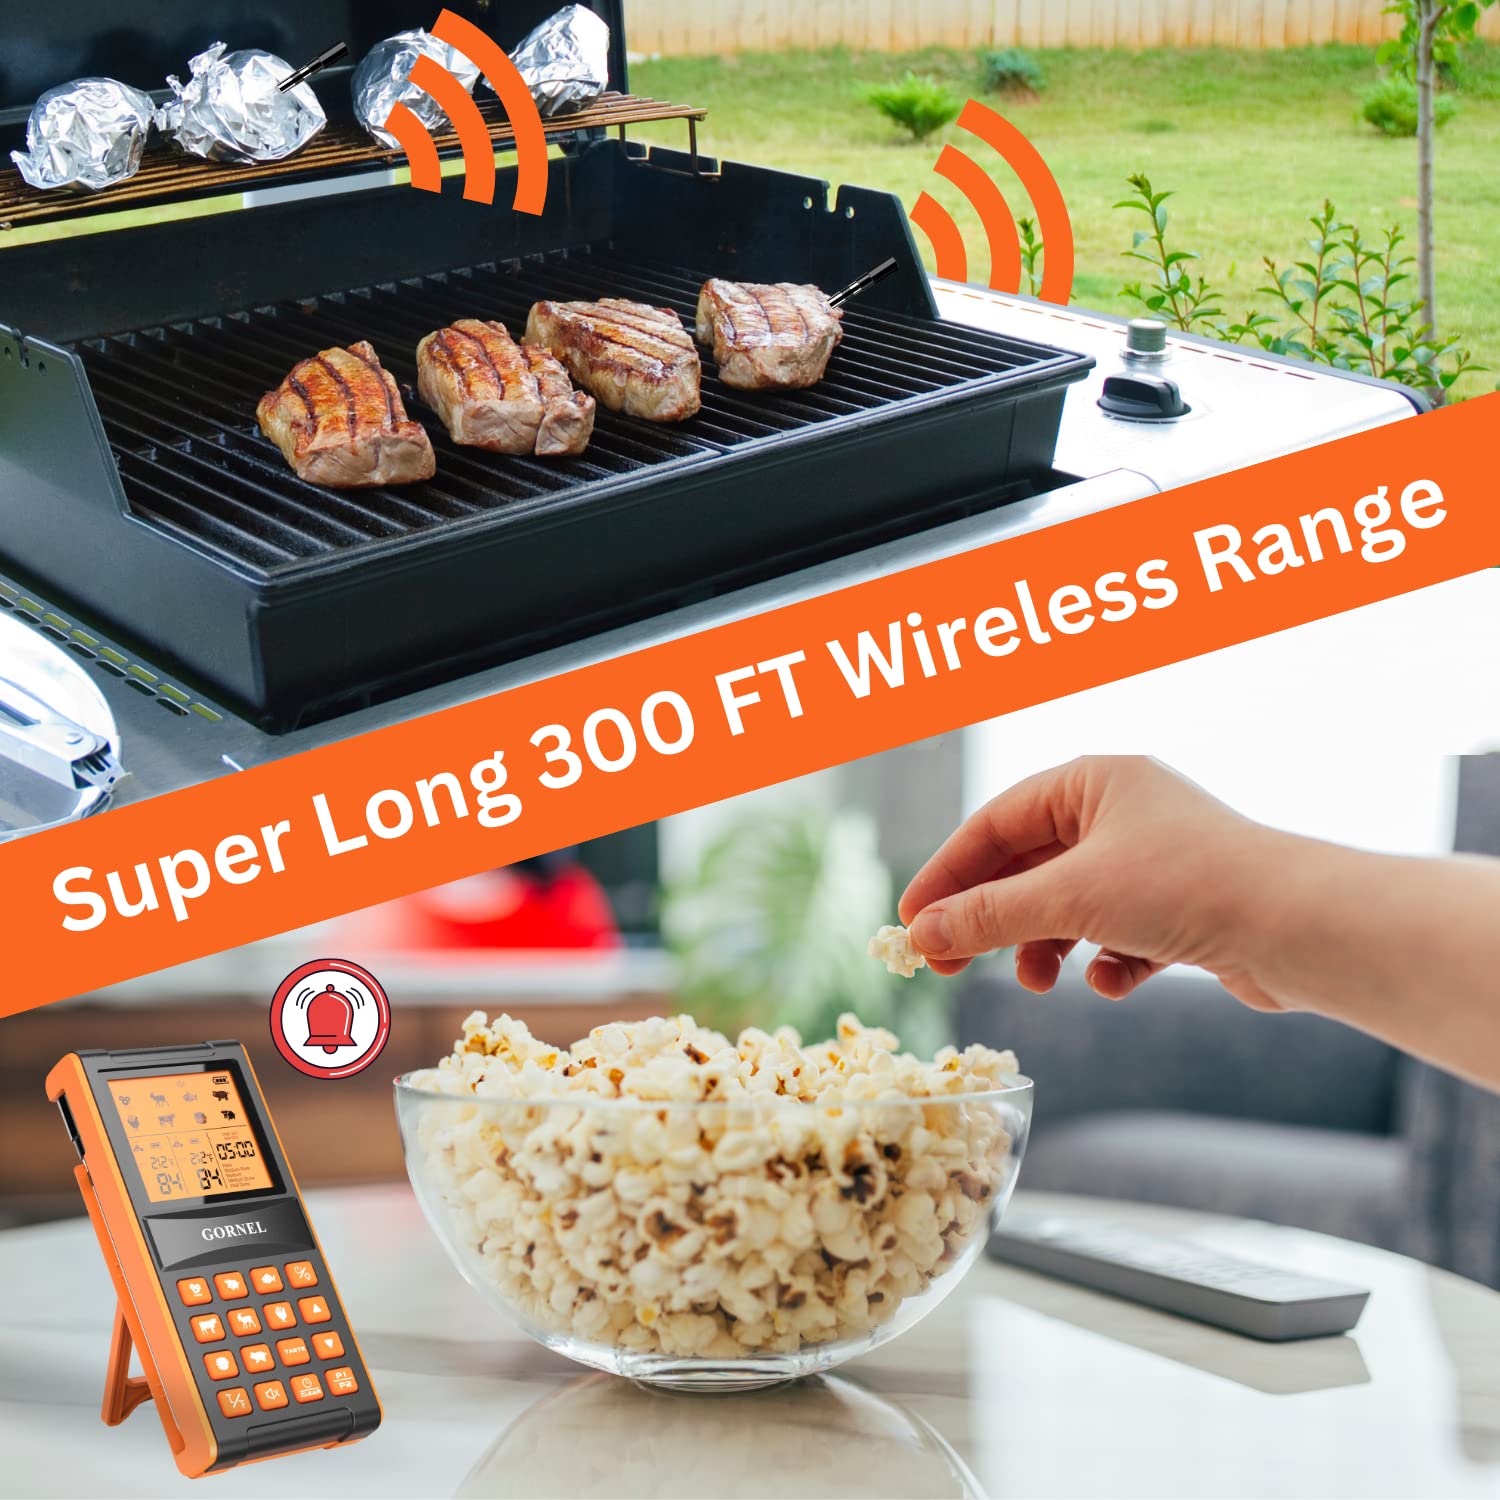 GORNEL Wireless Meat Thermometer – Digital Cooking Thermometer with 2 Probes – 300Ft Remote Range Food Thermometer – IP65 Waterproof Probes – Preprogrammed Temperatures - Ideal for BBQ, Oven, Grill